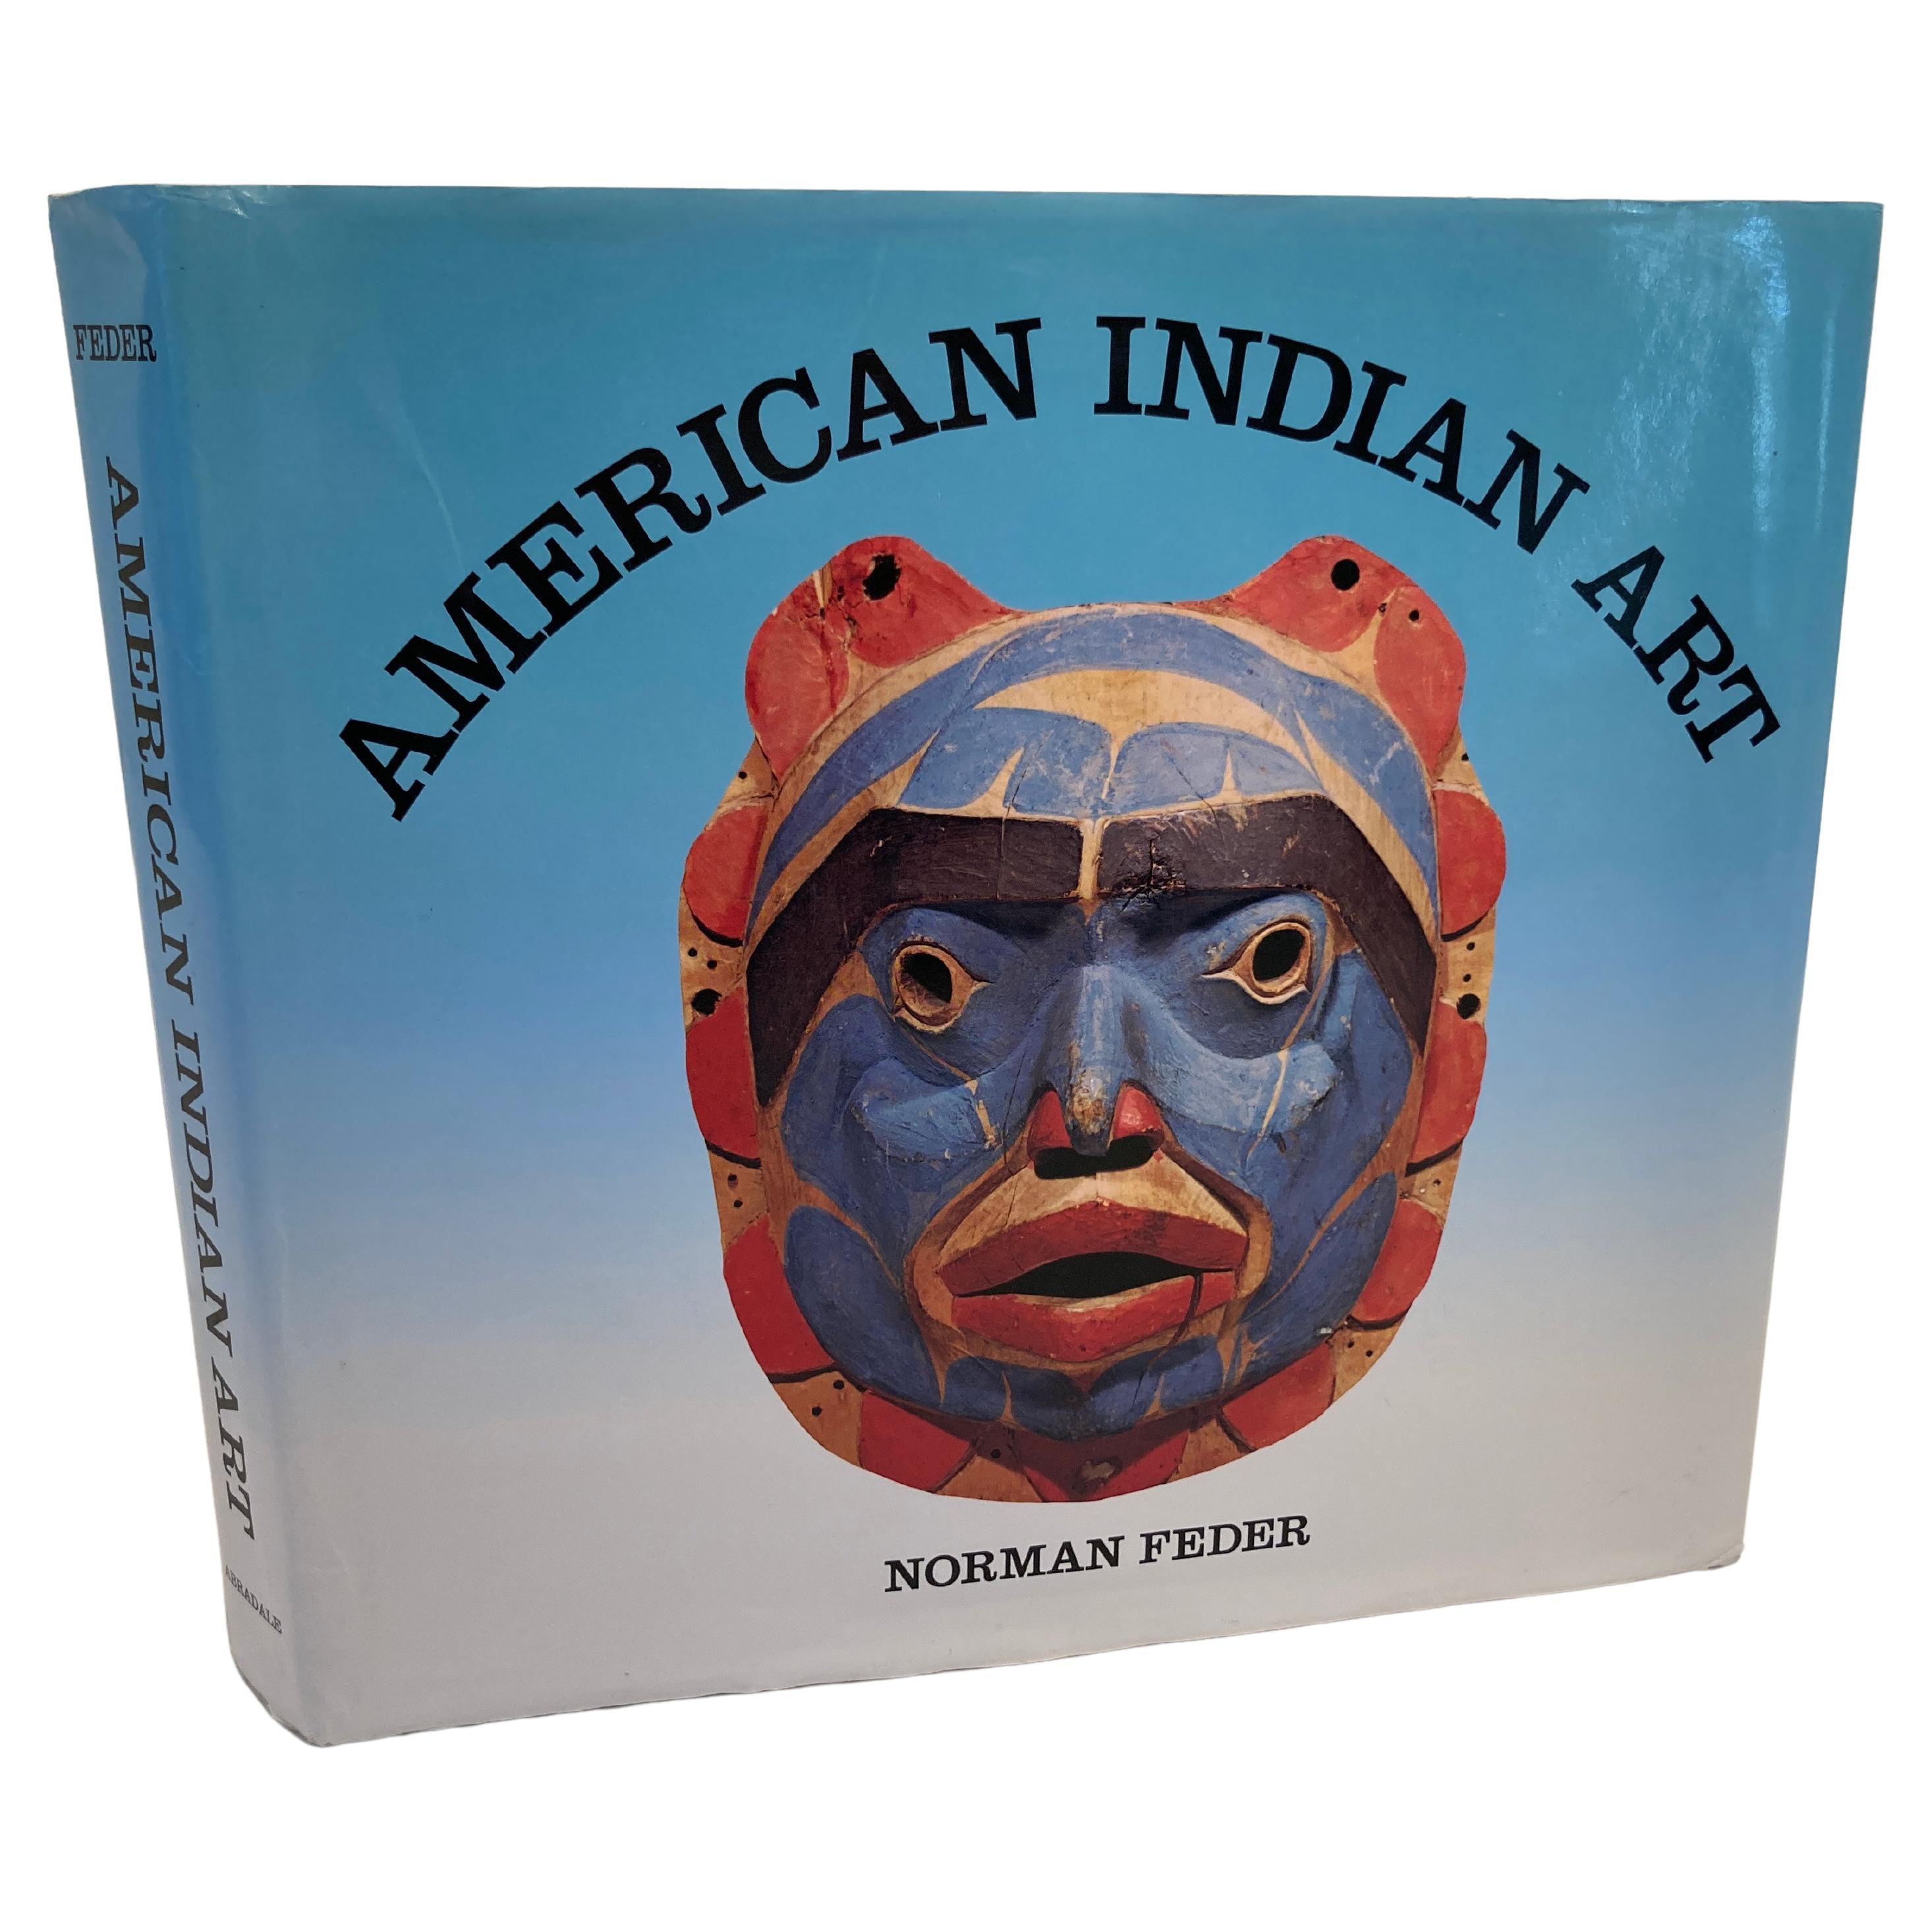 American Indian Art by Norman Feder Hardcover Book